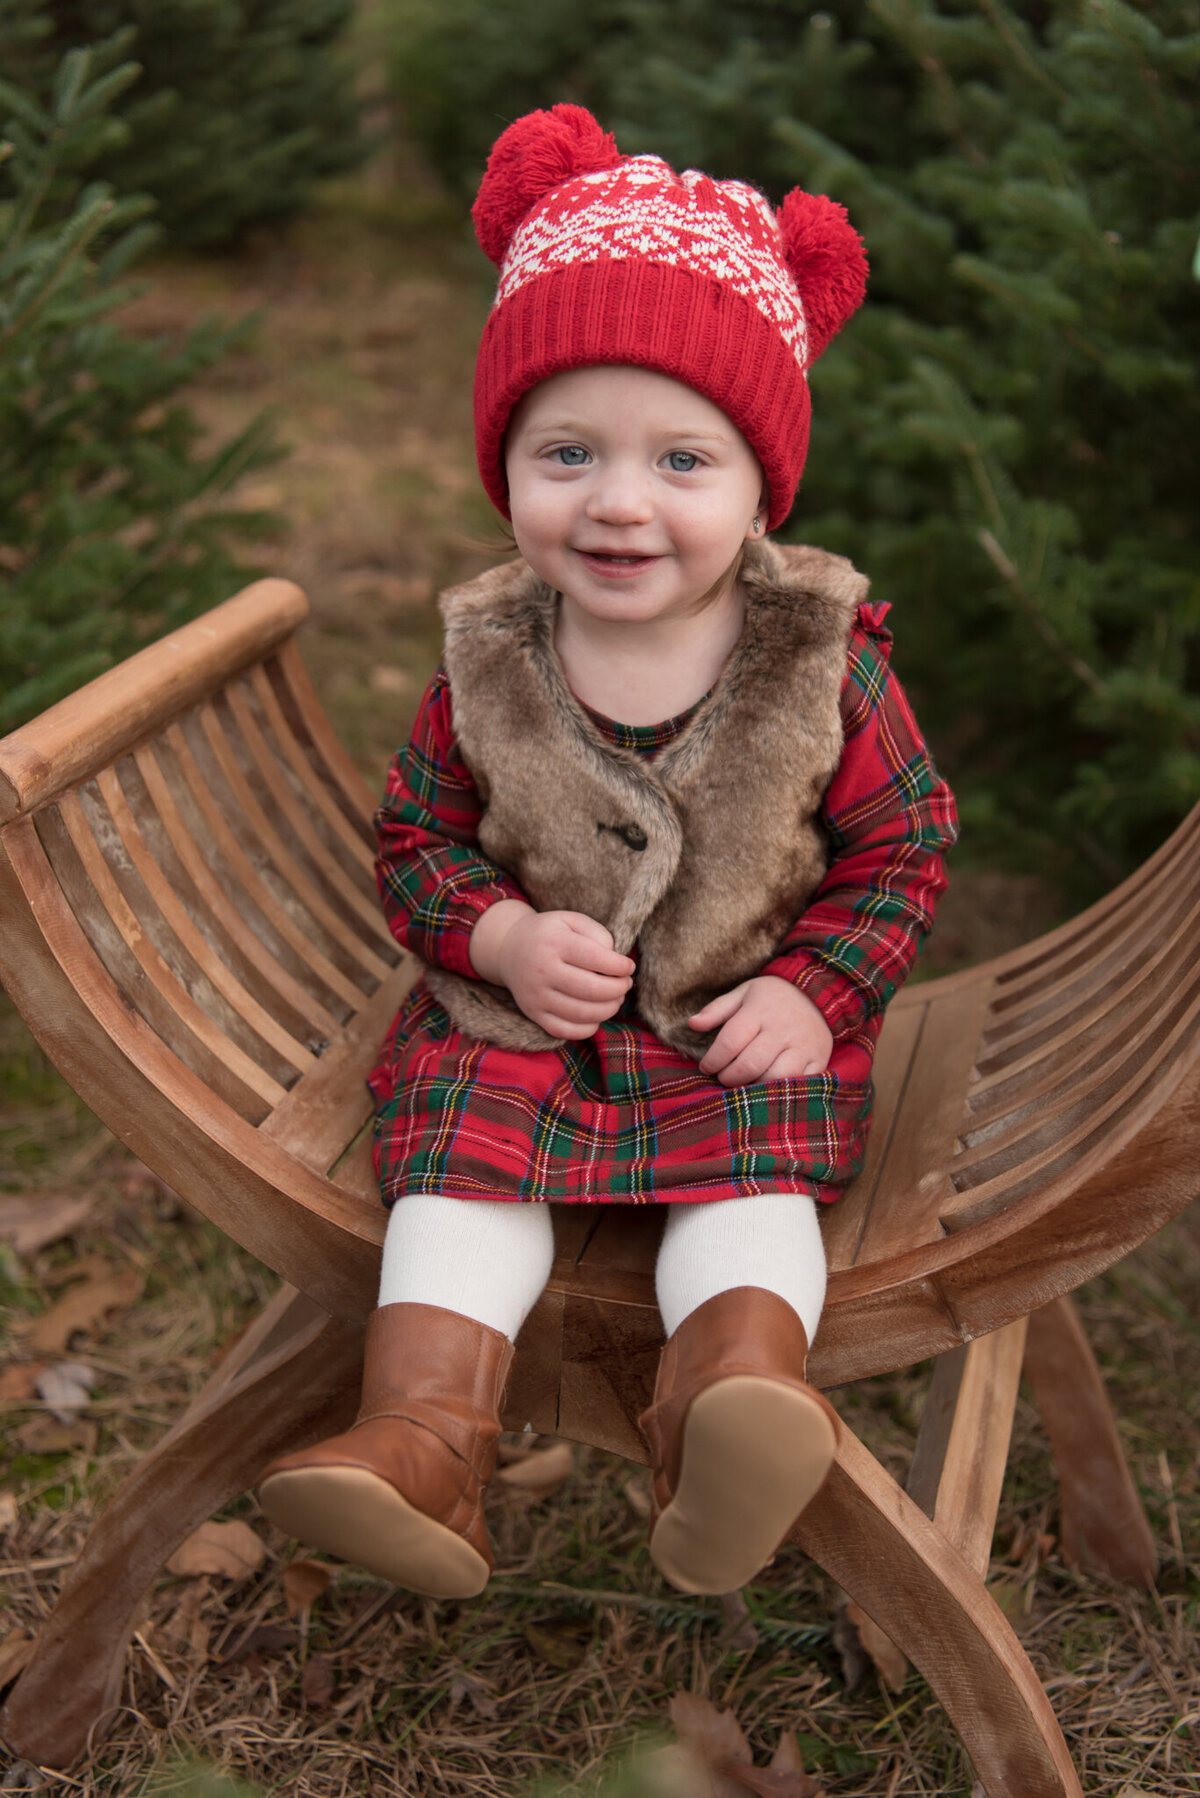 Young girl in red hat sitting on brown bench and smiling at the camera